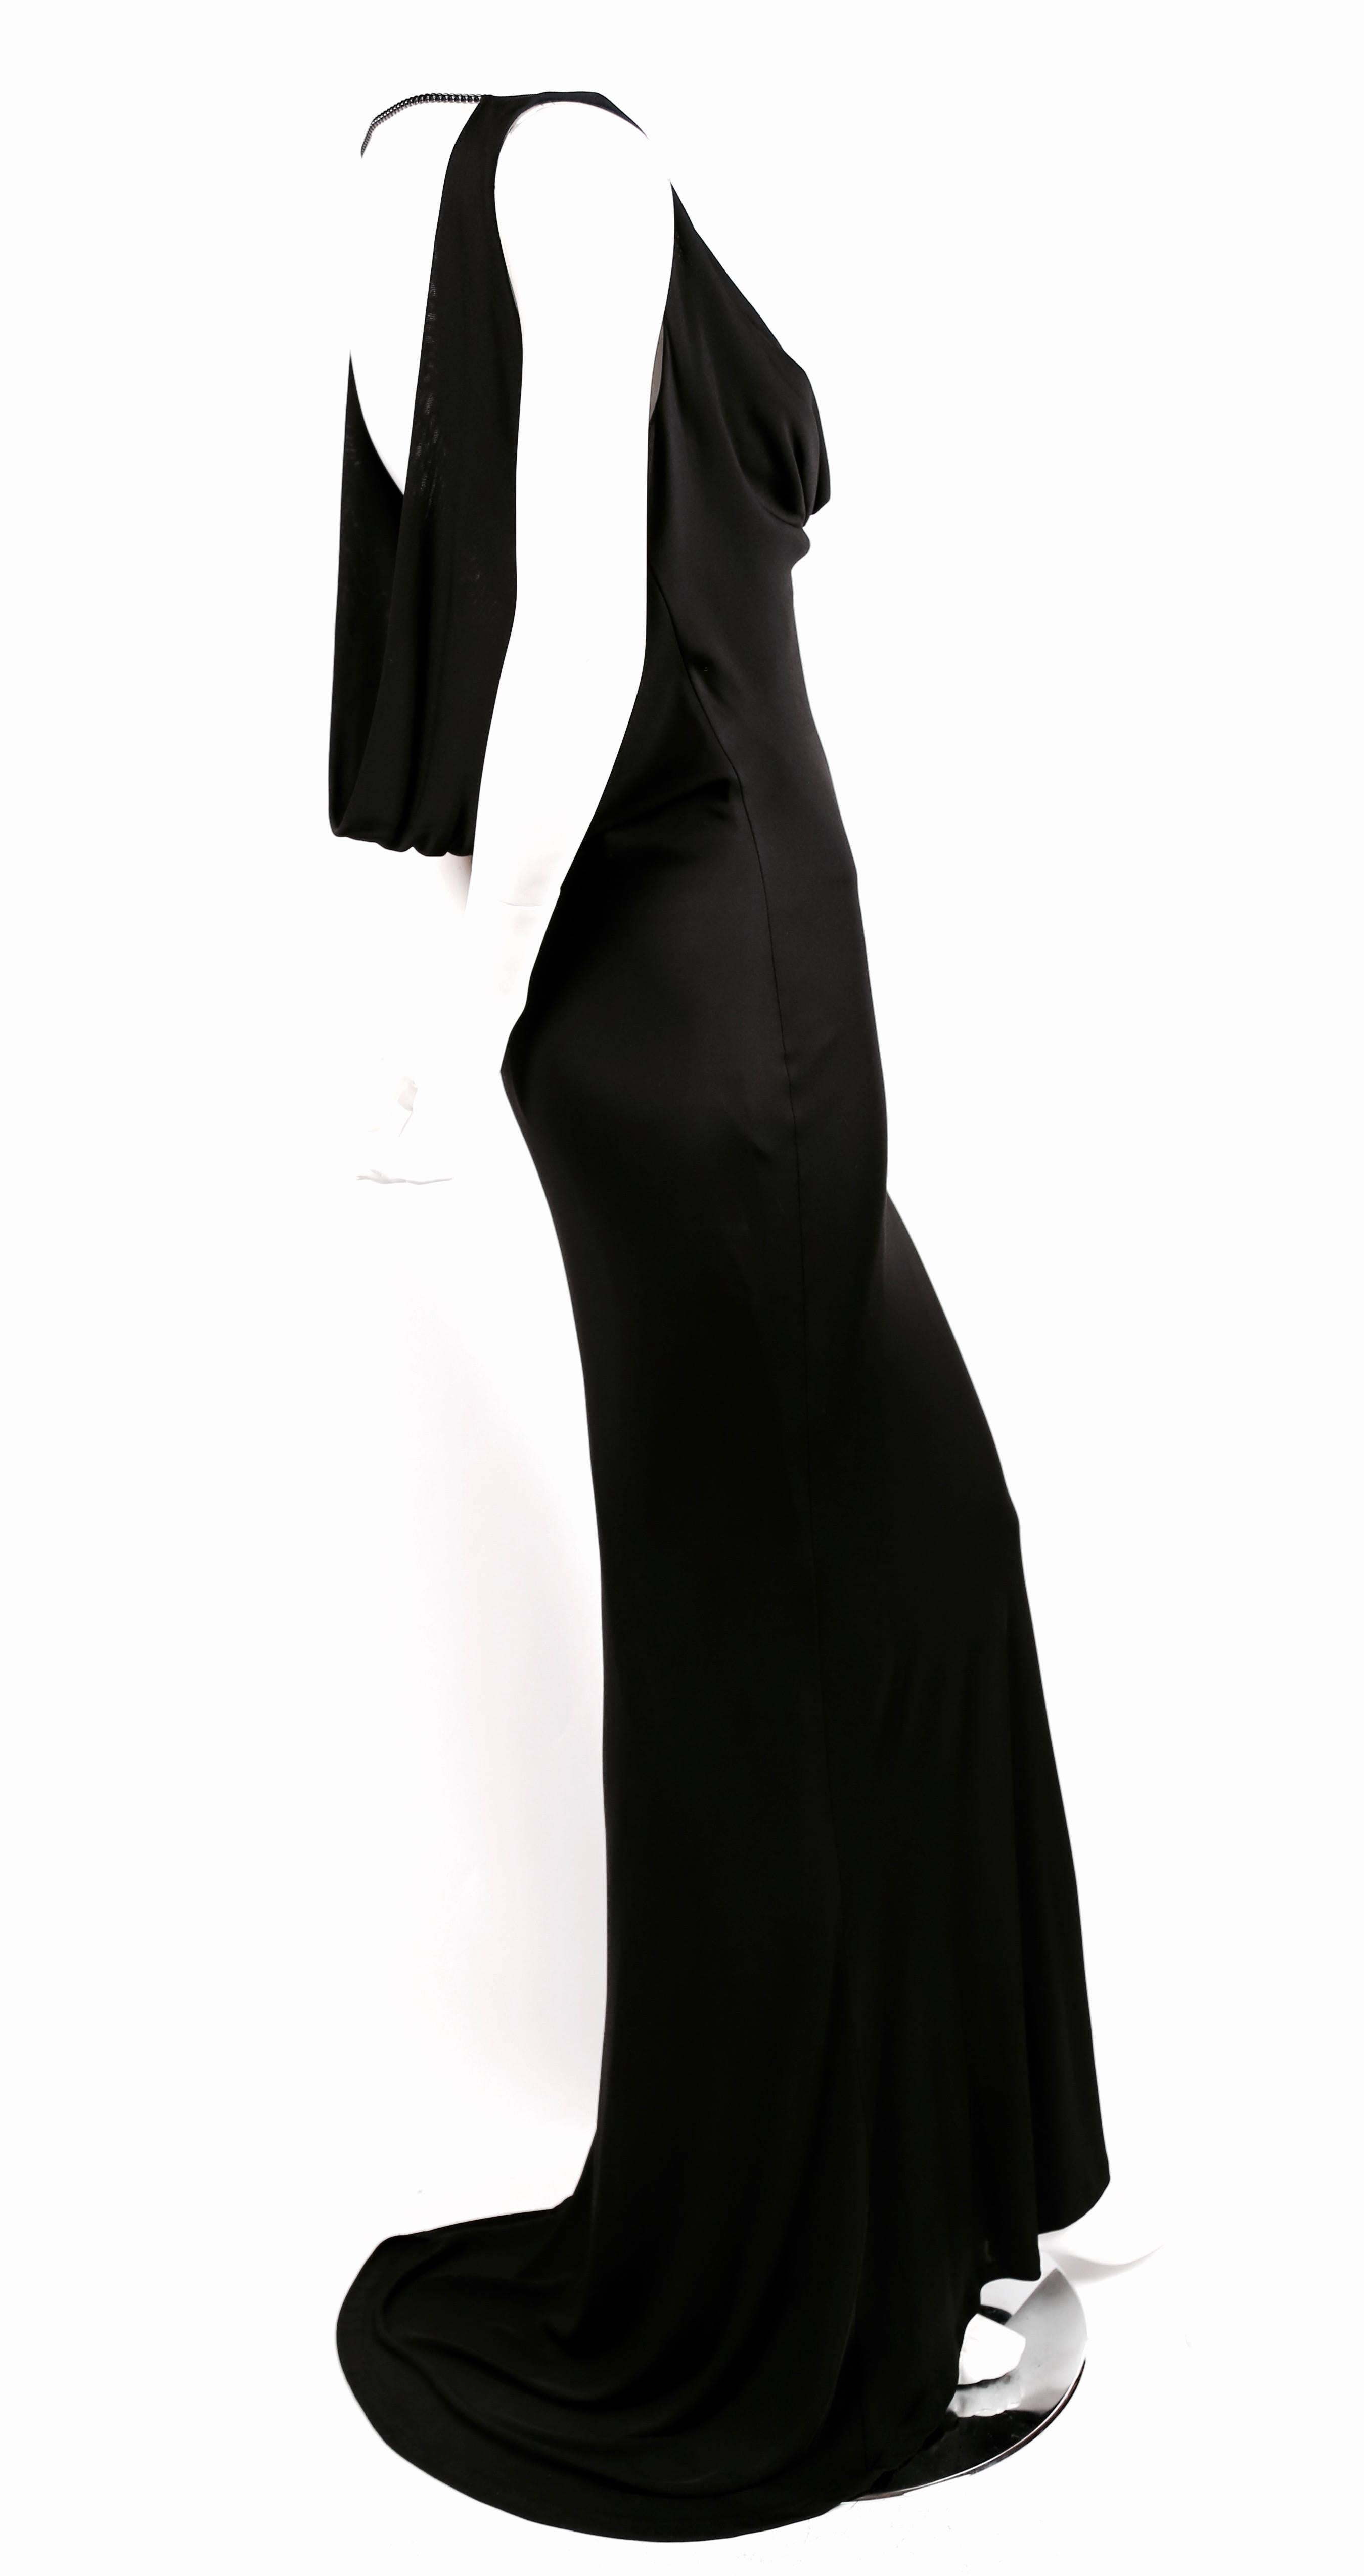 Jet black bias cut jersey gown with cowl neck and low back with gunmetal black chain detail at shoulders from Alexander McQueen dating to the mid 2000's. Dress is labeled an Italian size 42, however it best fits a US size 4 or 6. Bust stretches to a